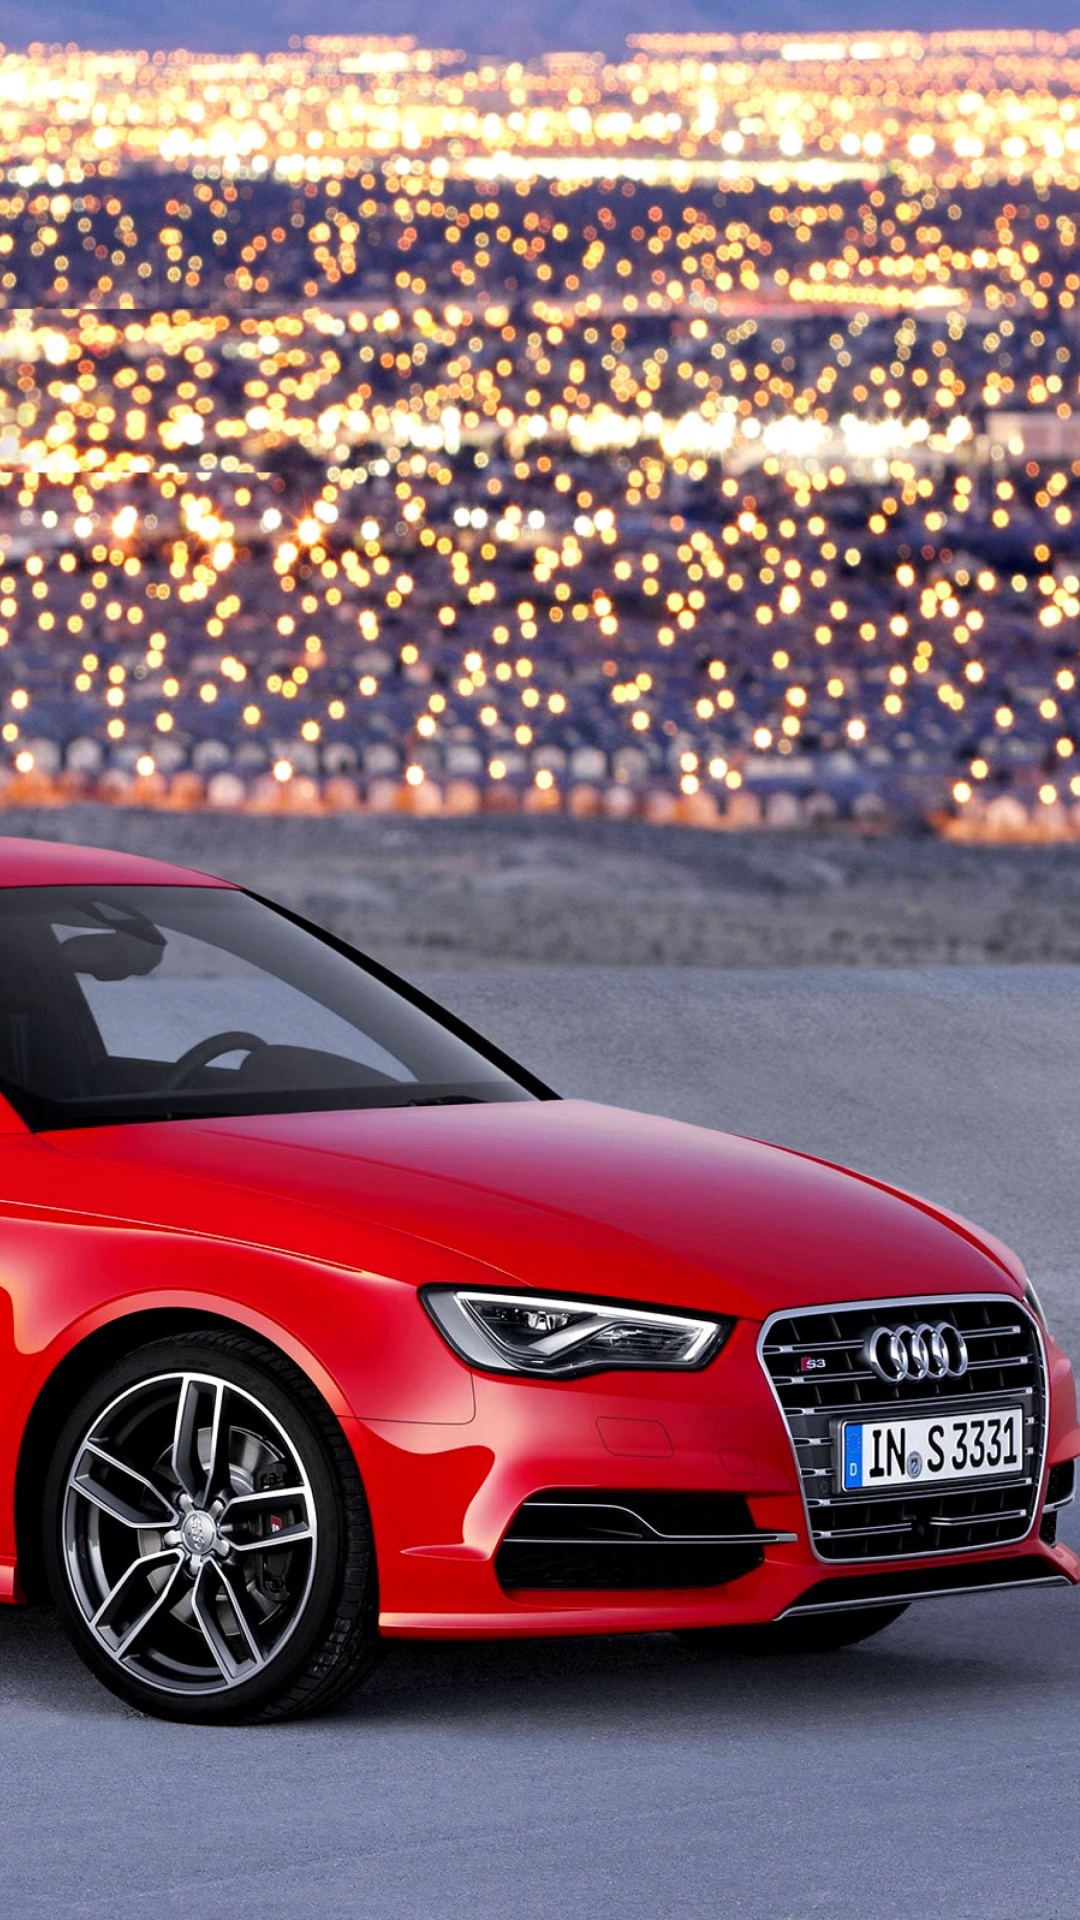 Audi A3 Pictures | Download Free Images on Unsplash